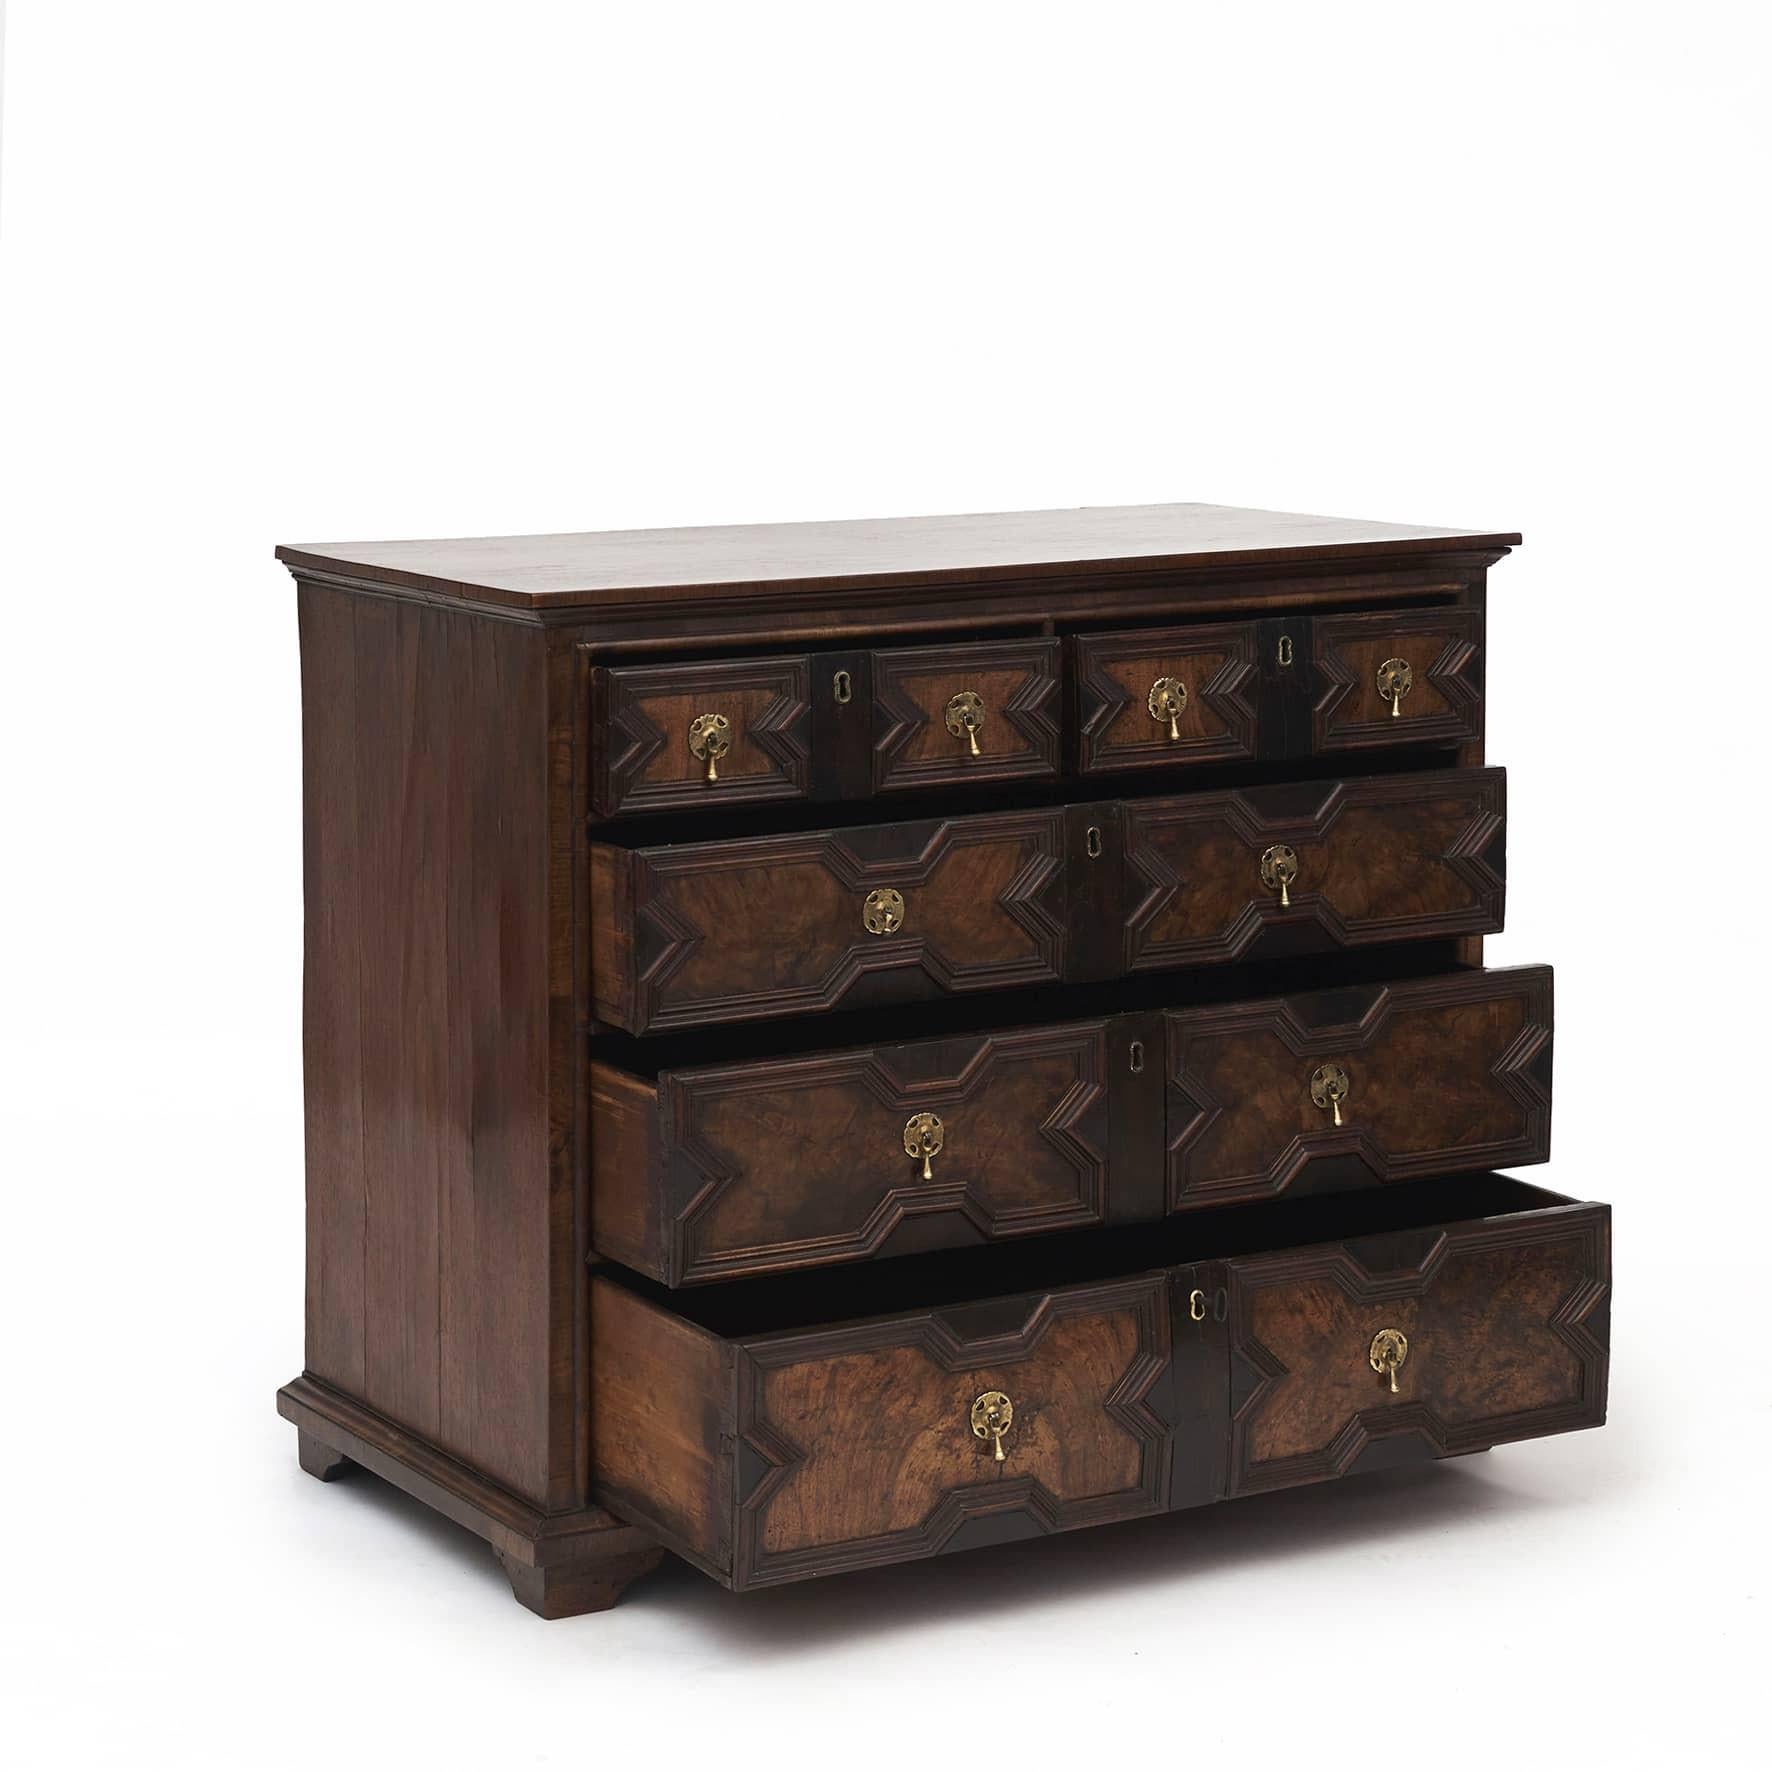 English 18th Century George I Jacobean Chest of Drawers In Good Condition For Sale In Kastrup, DK